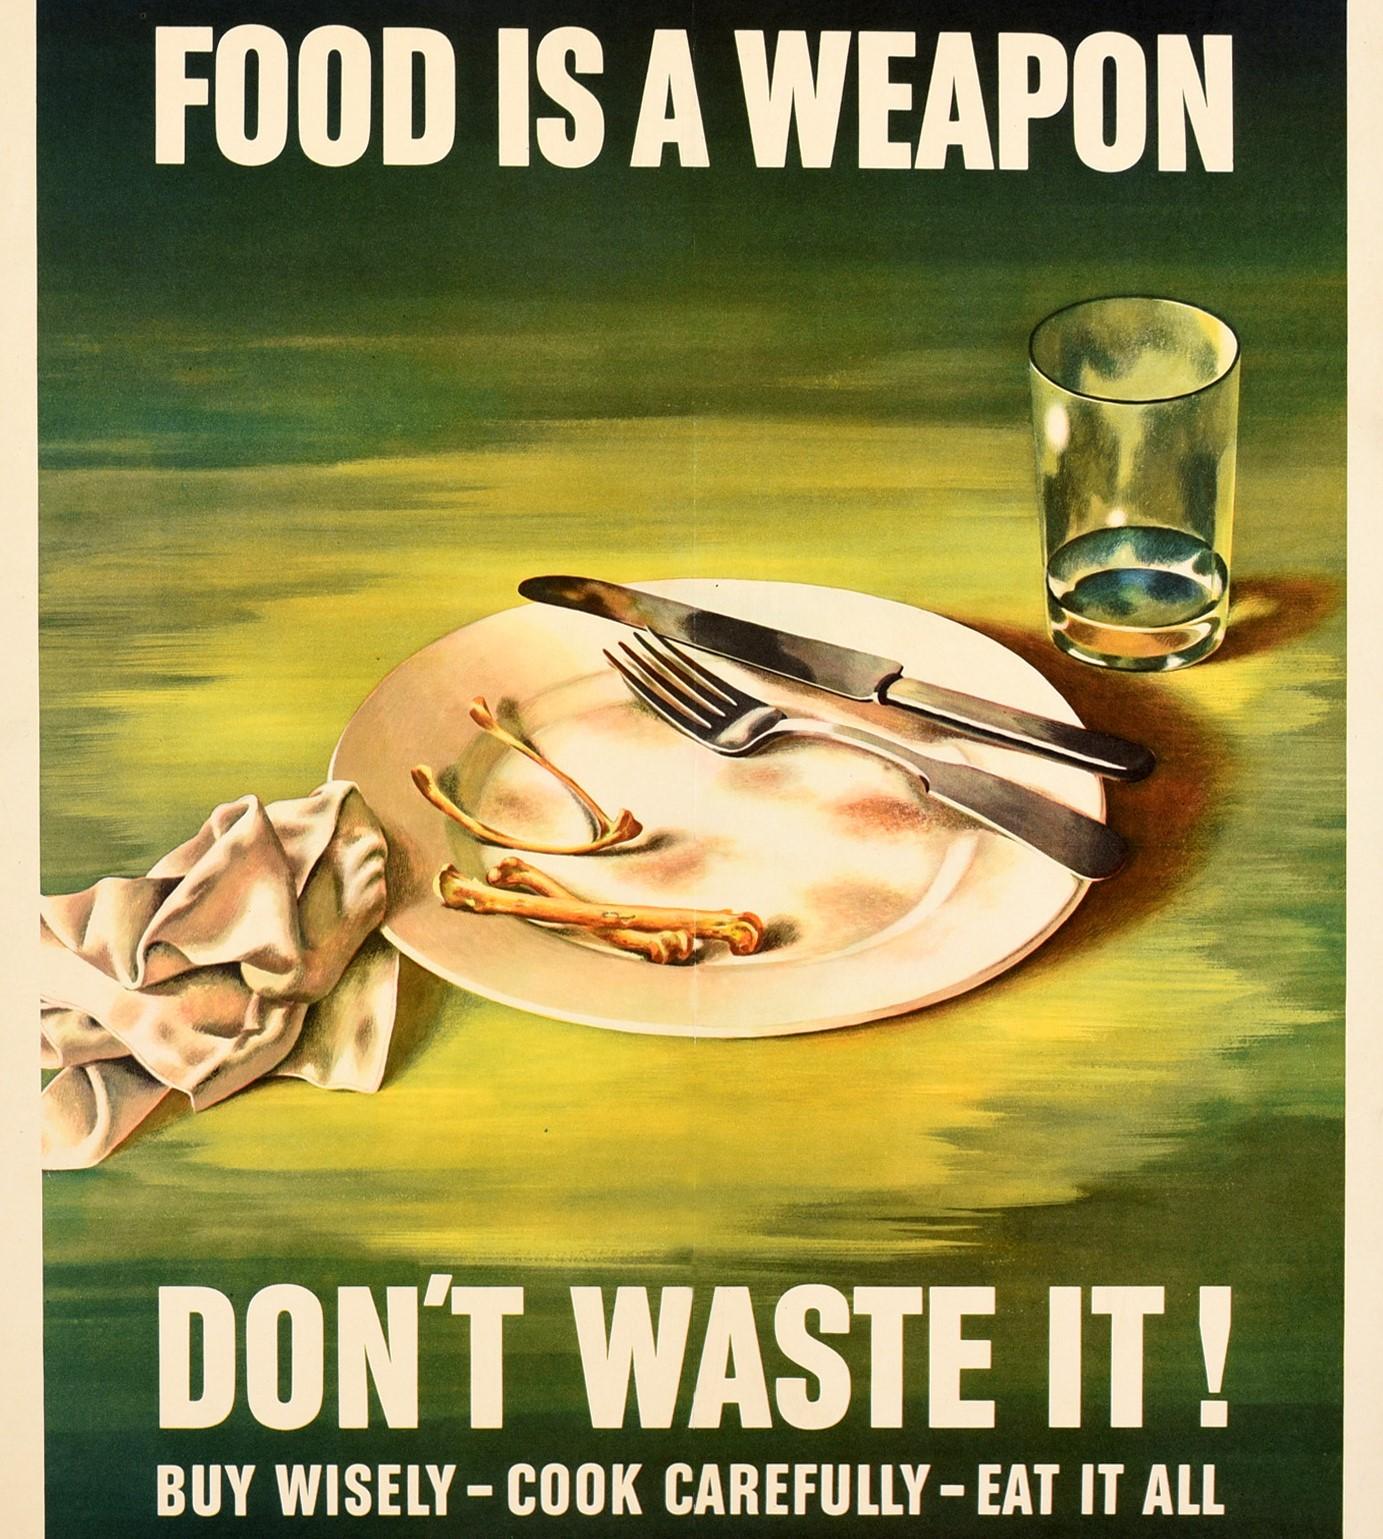 food is a weapon propaganda poster